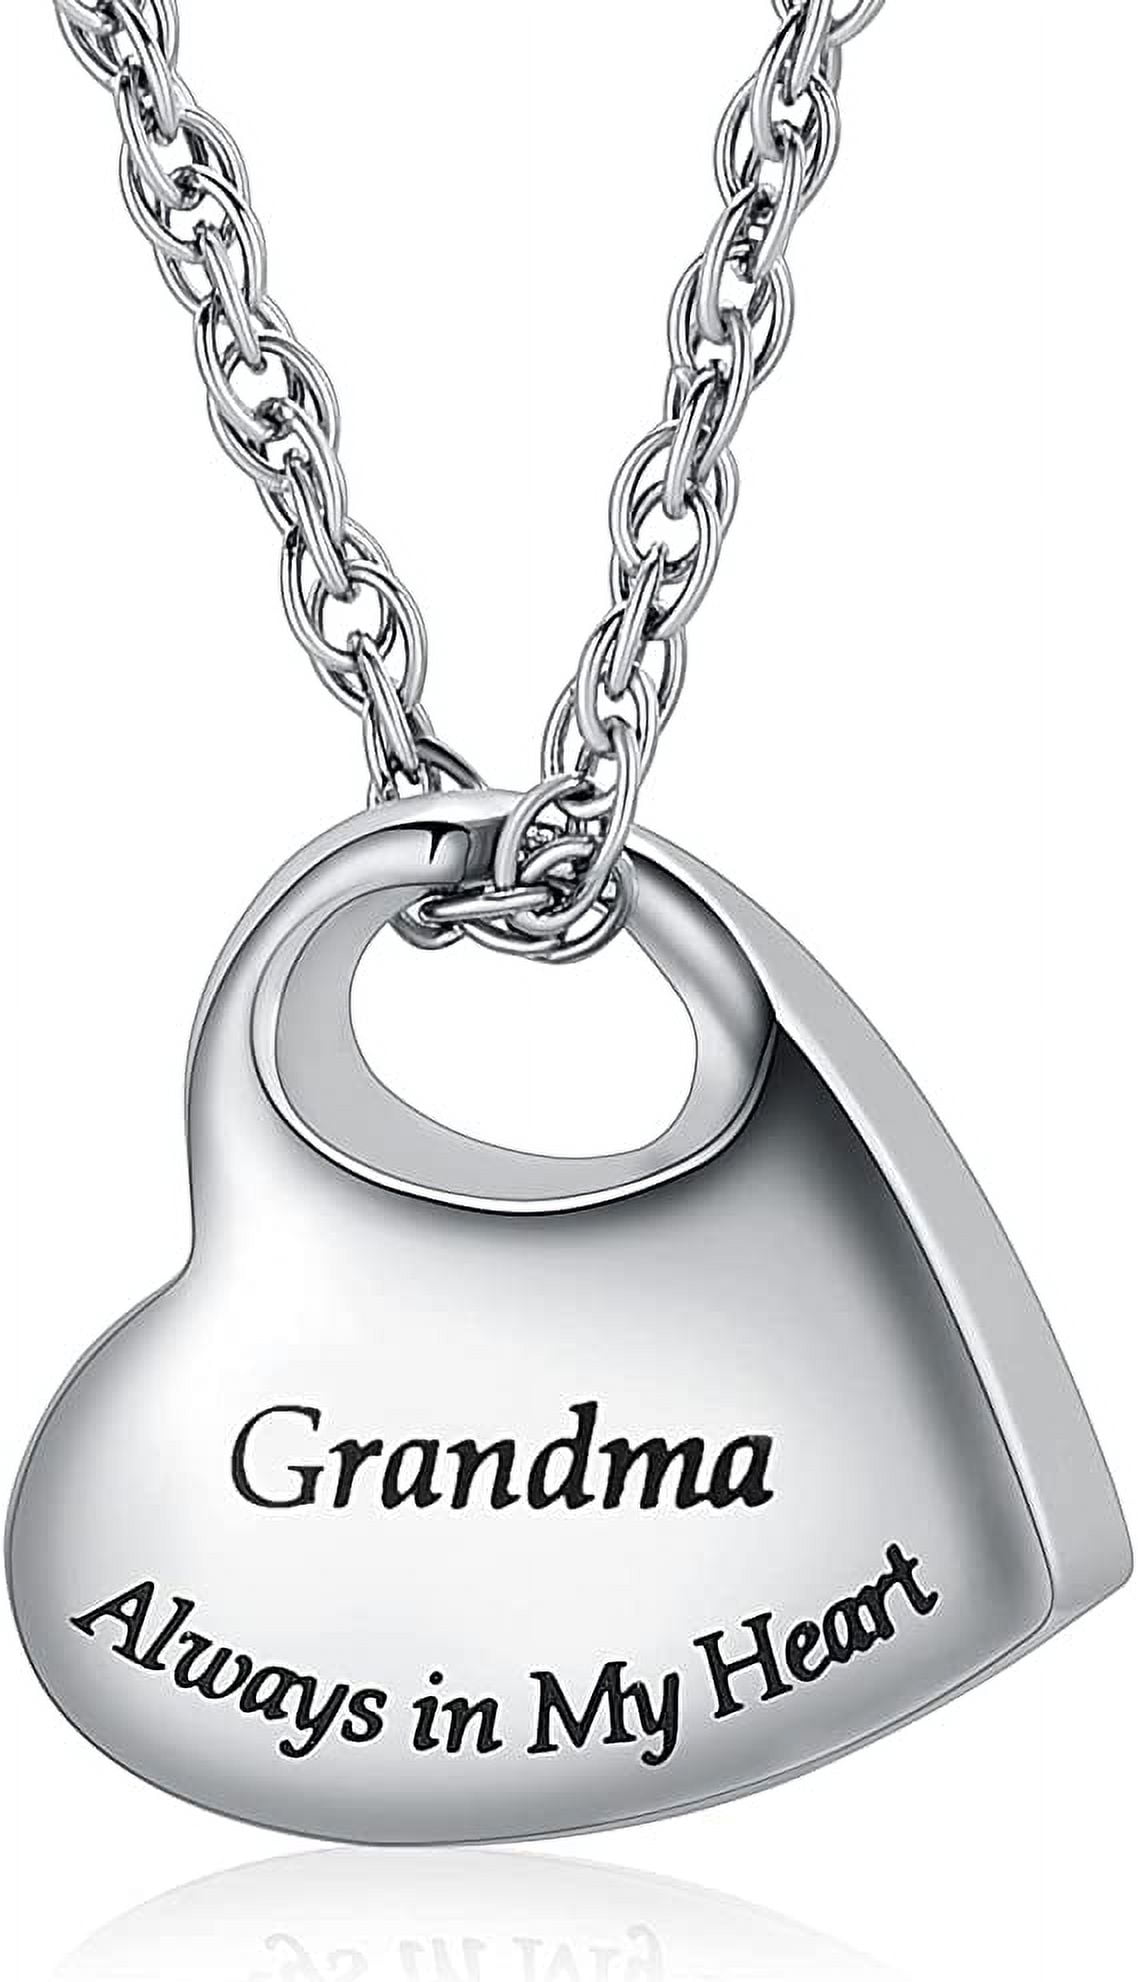 Heart Cremation Urn Necklace Ashes Jewelry Memorial Locket Ash Mini Pendant Human Pet Always My heart For Dad Mom Son Grandma Grandpa Brother a3090146 36c1 4757 8bef 11ca5457dfce.906546b6973d090e841297f694e59866